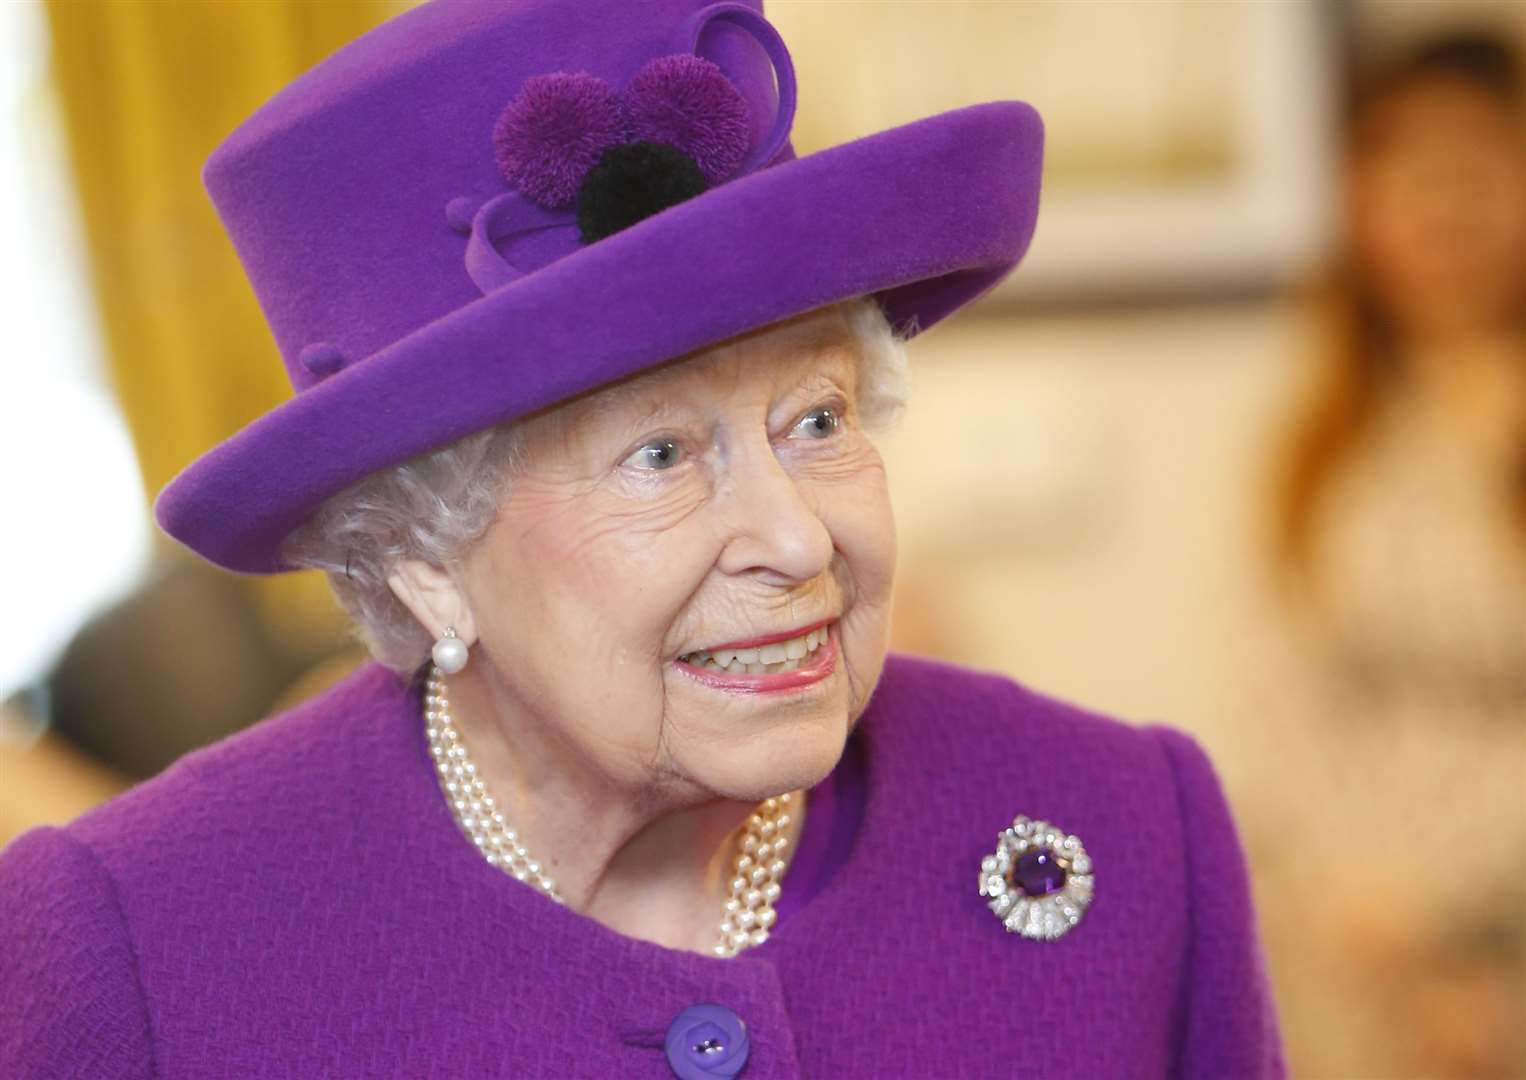 Her Majesty The Queen, pictured here on a visit to Kent, will welcome visitors to her palace garden in London this summer